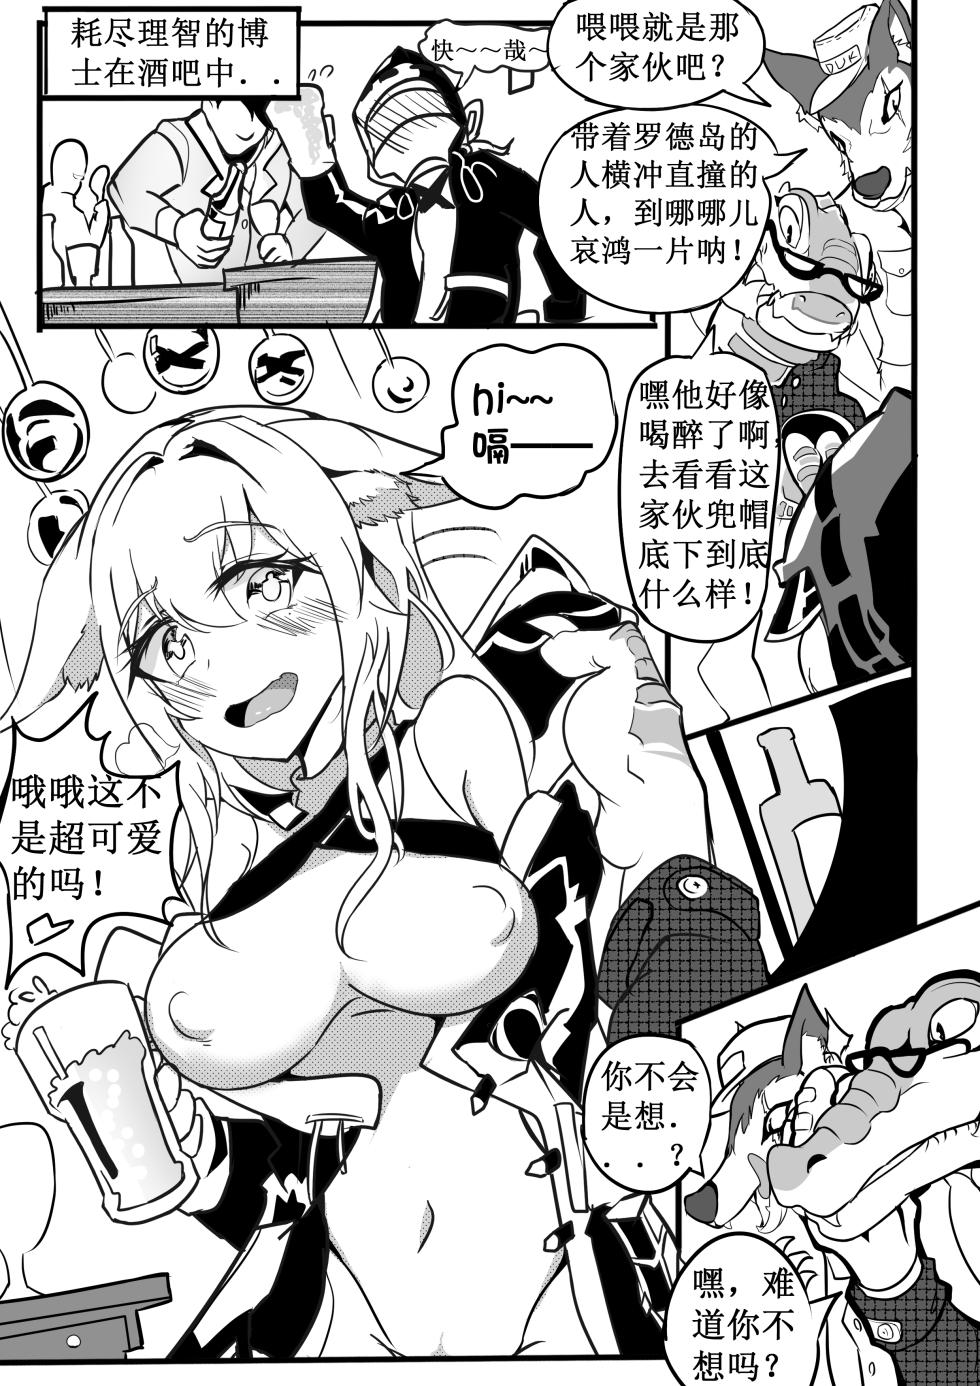 [White Bank] Rhode Island Busty Doctor's Drunken Record (Arknights) [Chinese] - Page 4